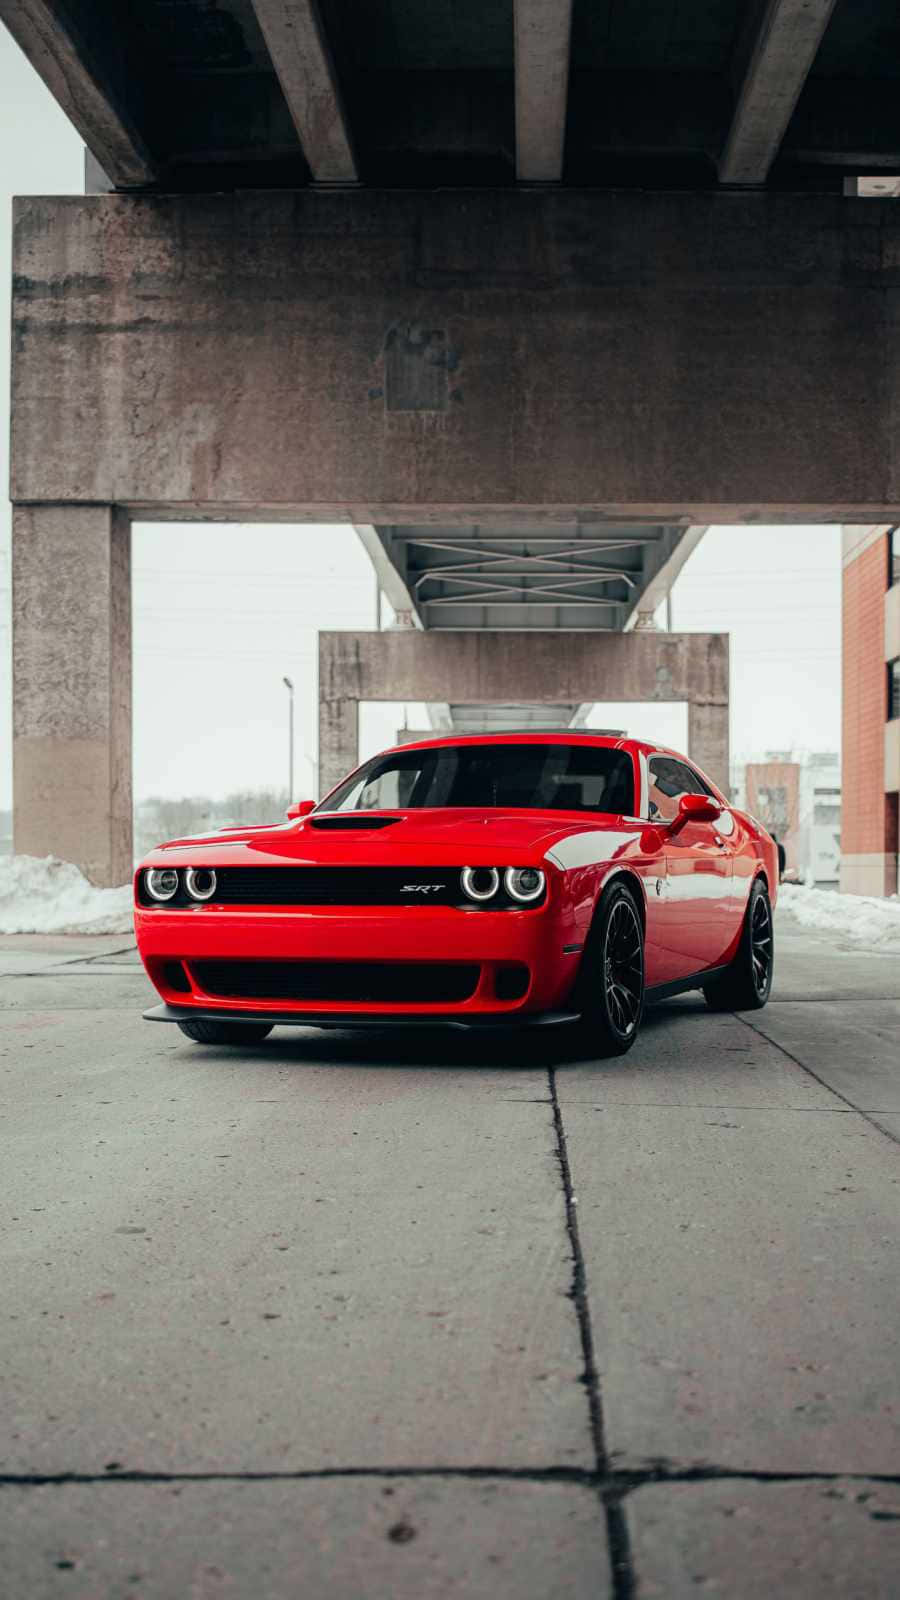 Get your hands on the latest Hellcat Iphone model Wallpaper